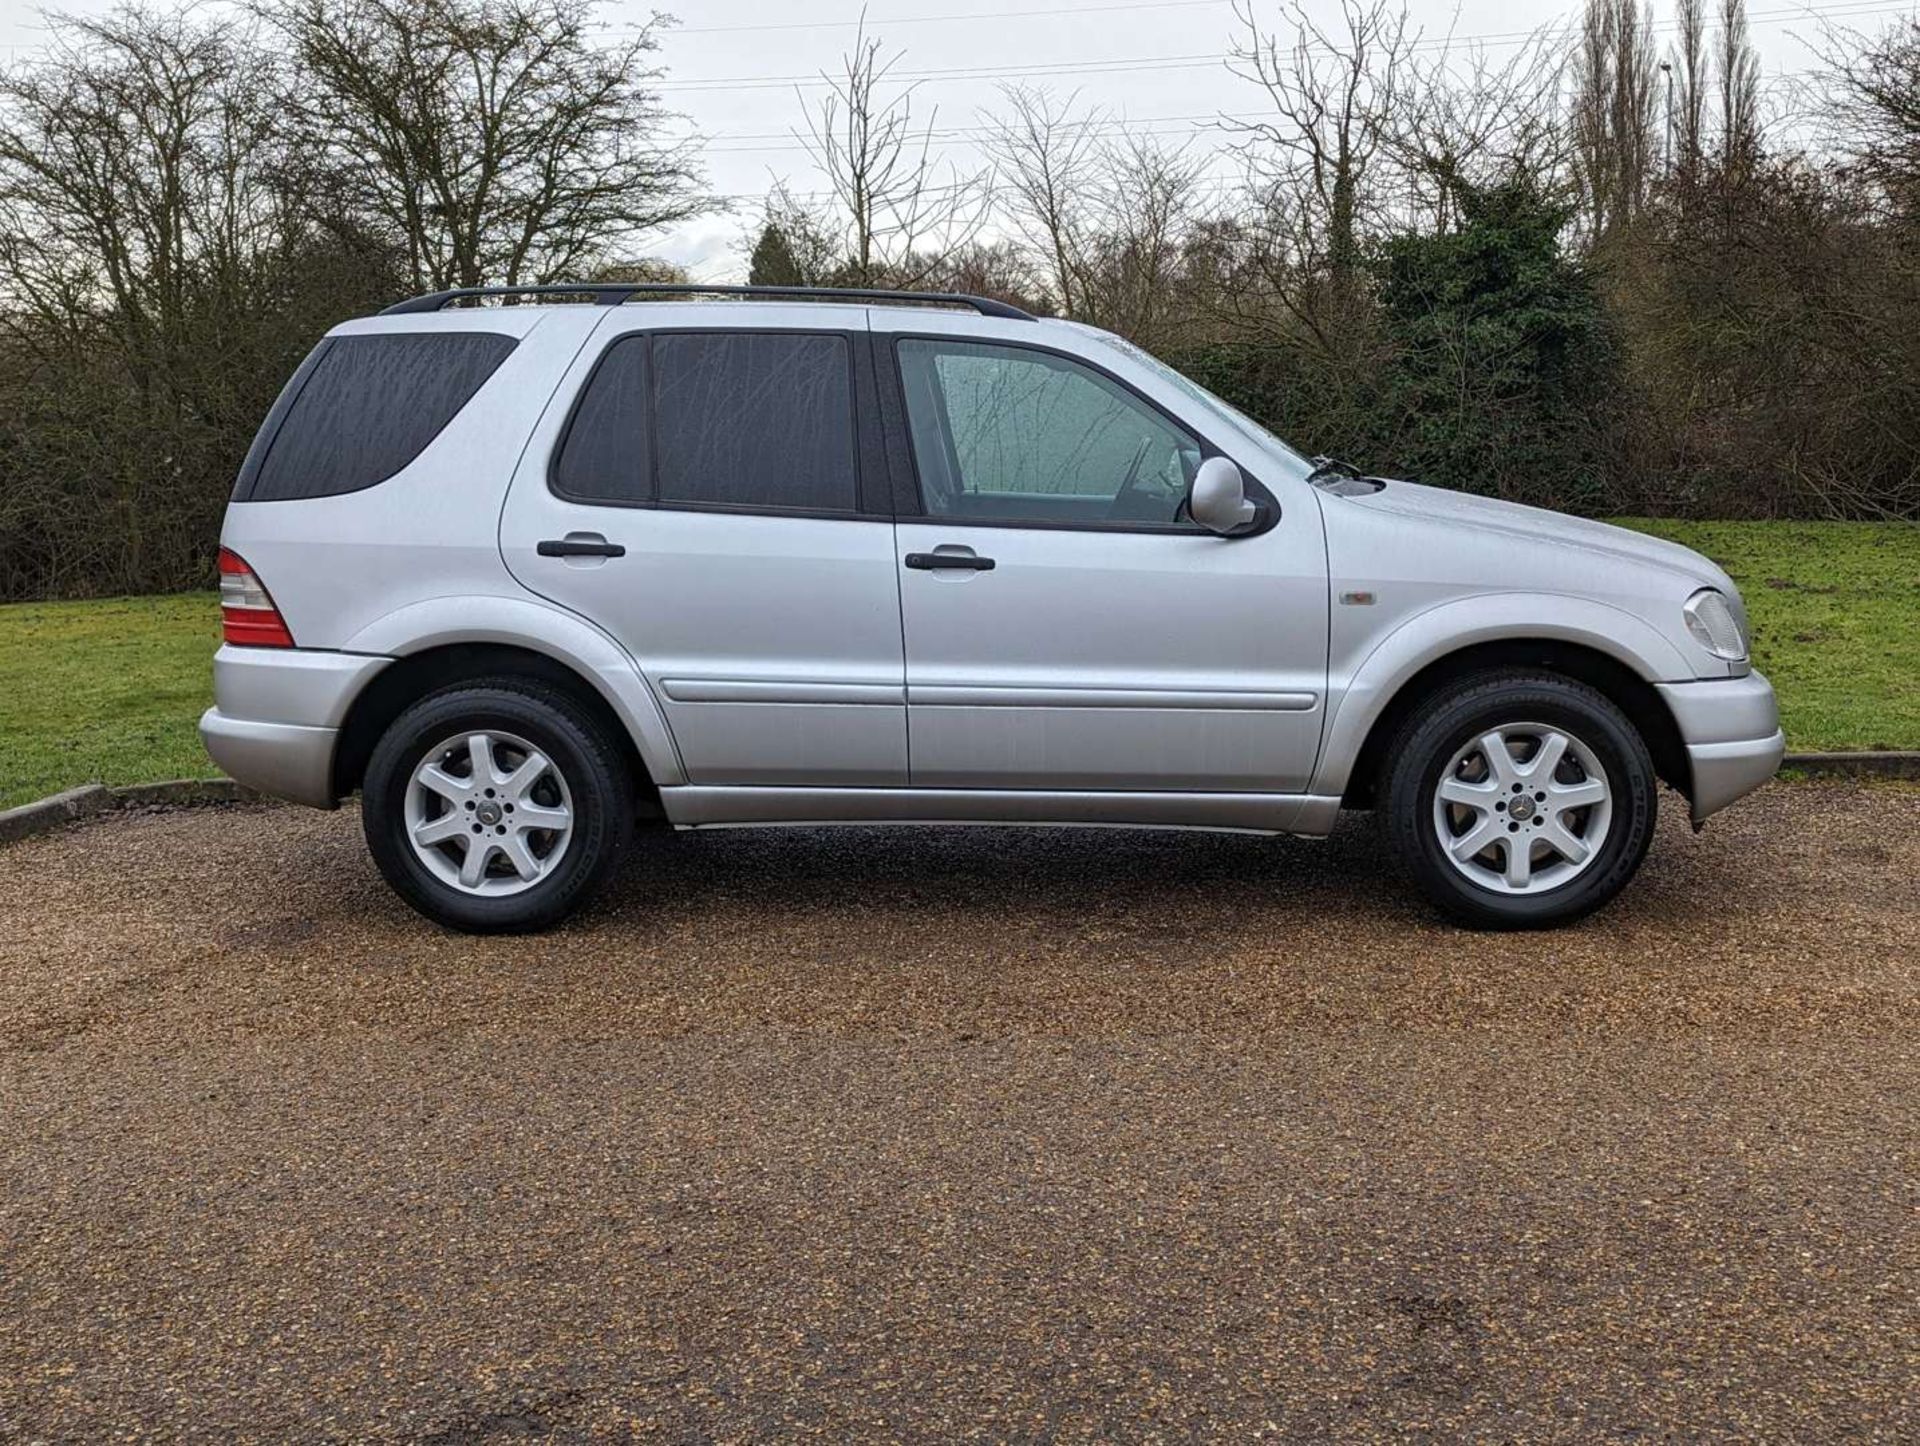 2001 MERCEDES ML 430 LHD - Image 8 of 24